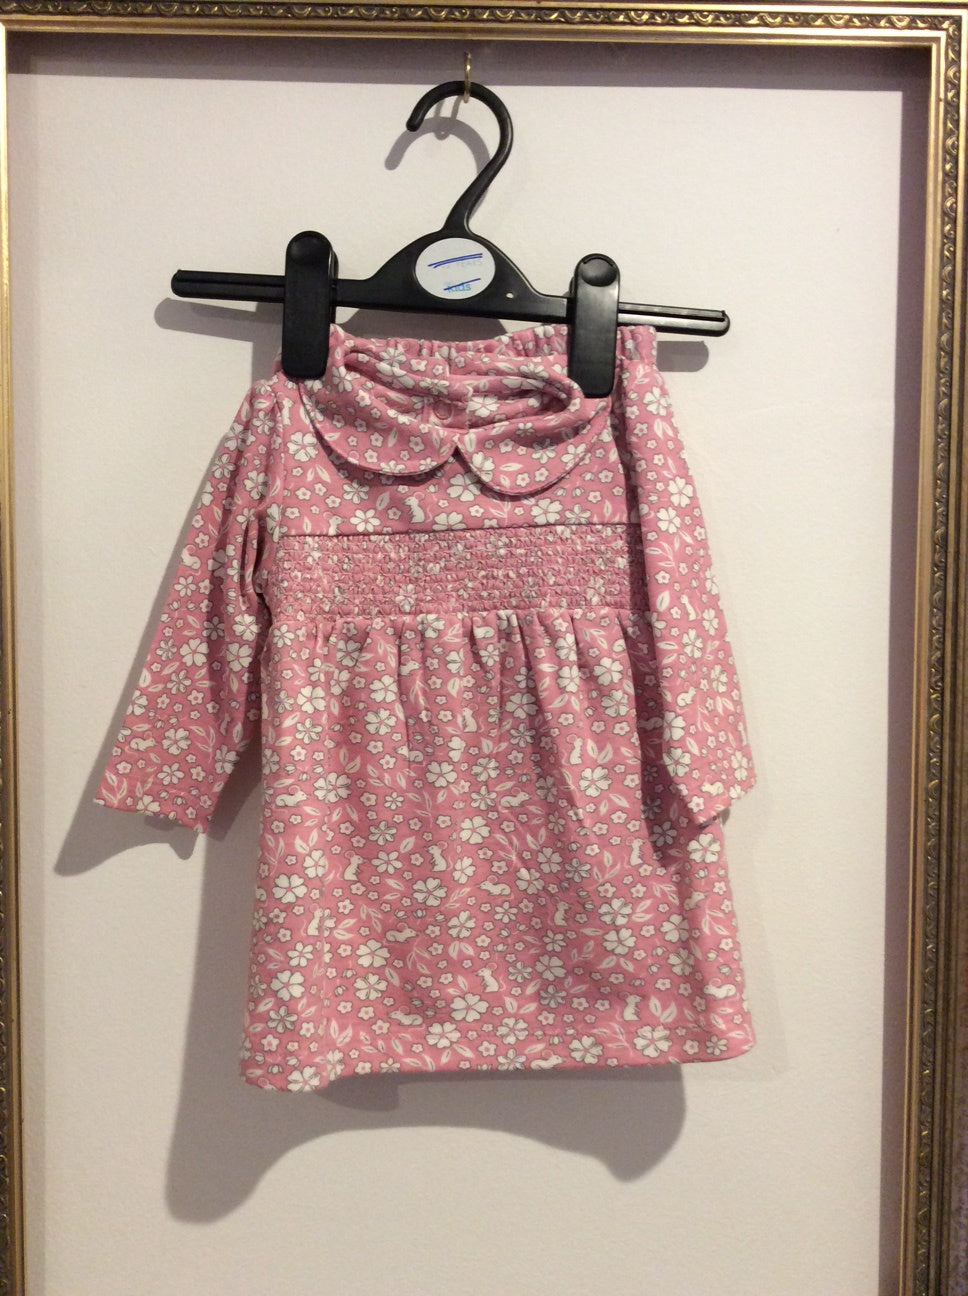 Pre-loved JoJo Pink Flowers Dress & Pants 3-6m with tags